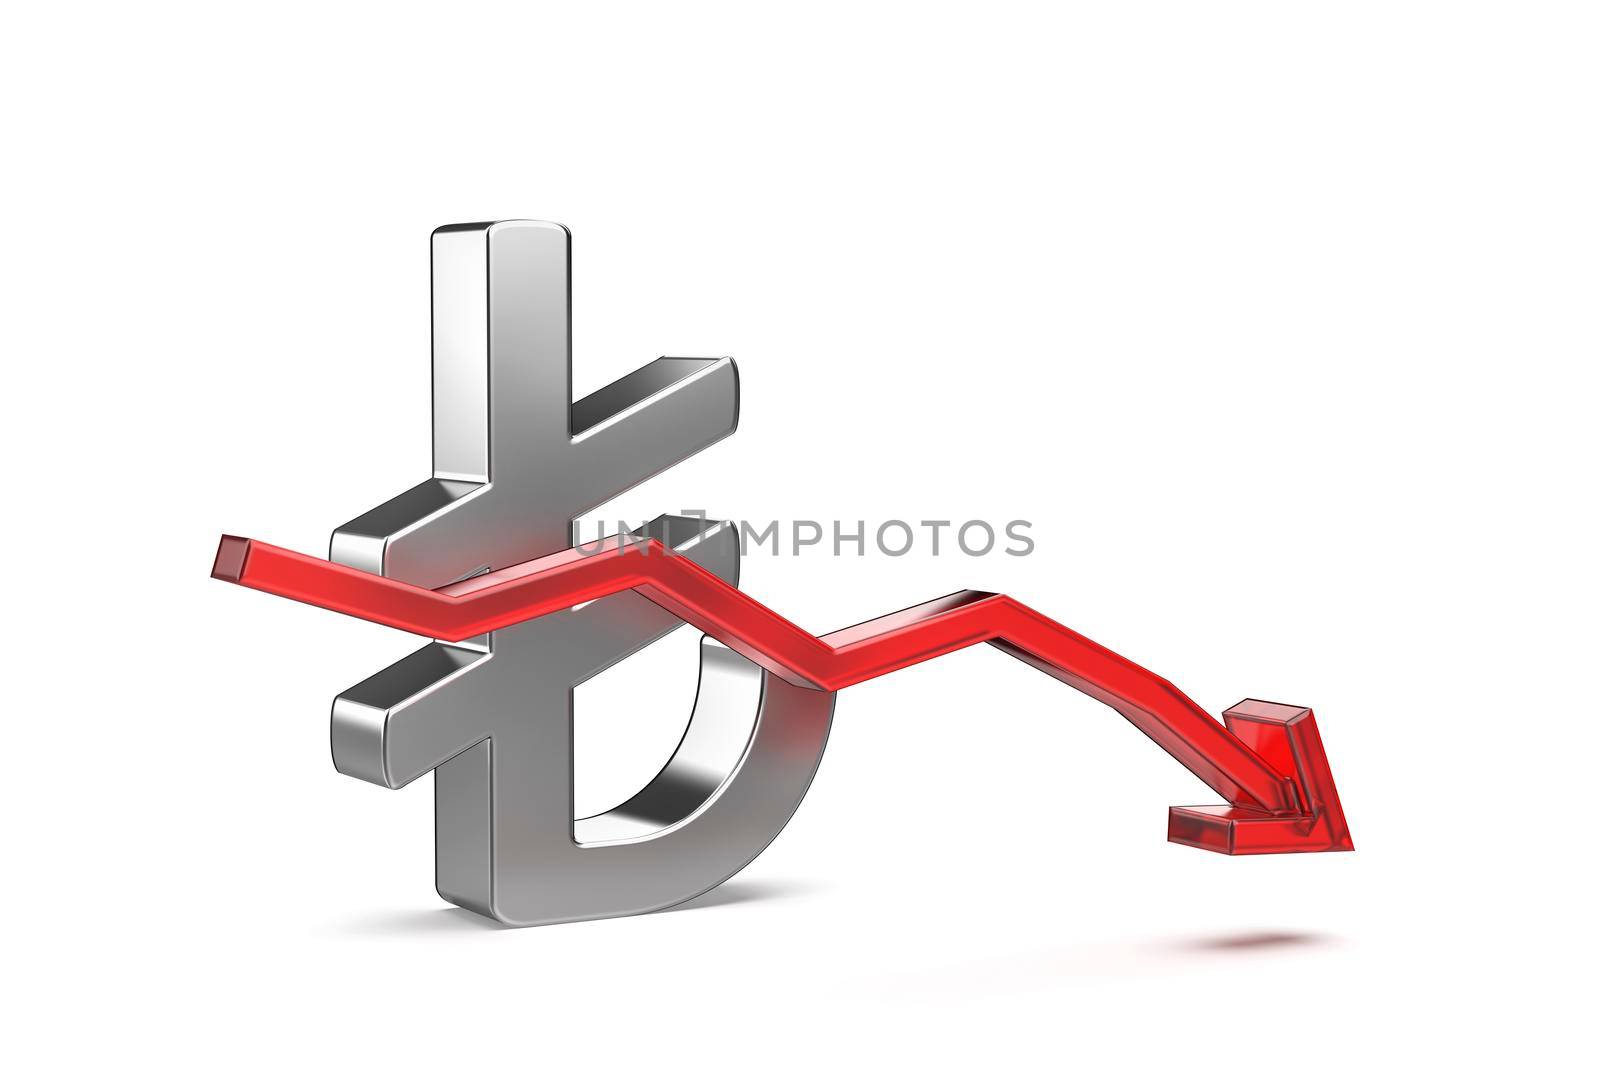 Turkish lira symbol with red arrow pointing down by magraphics